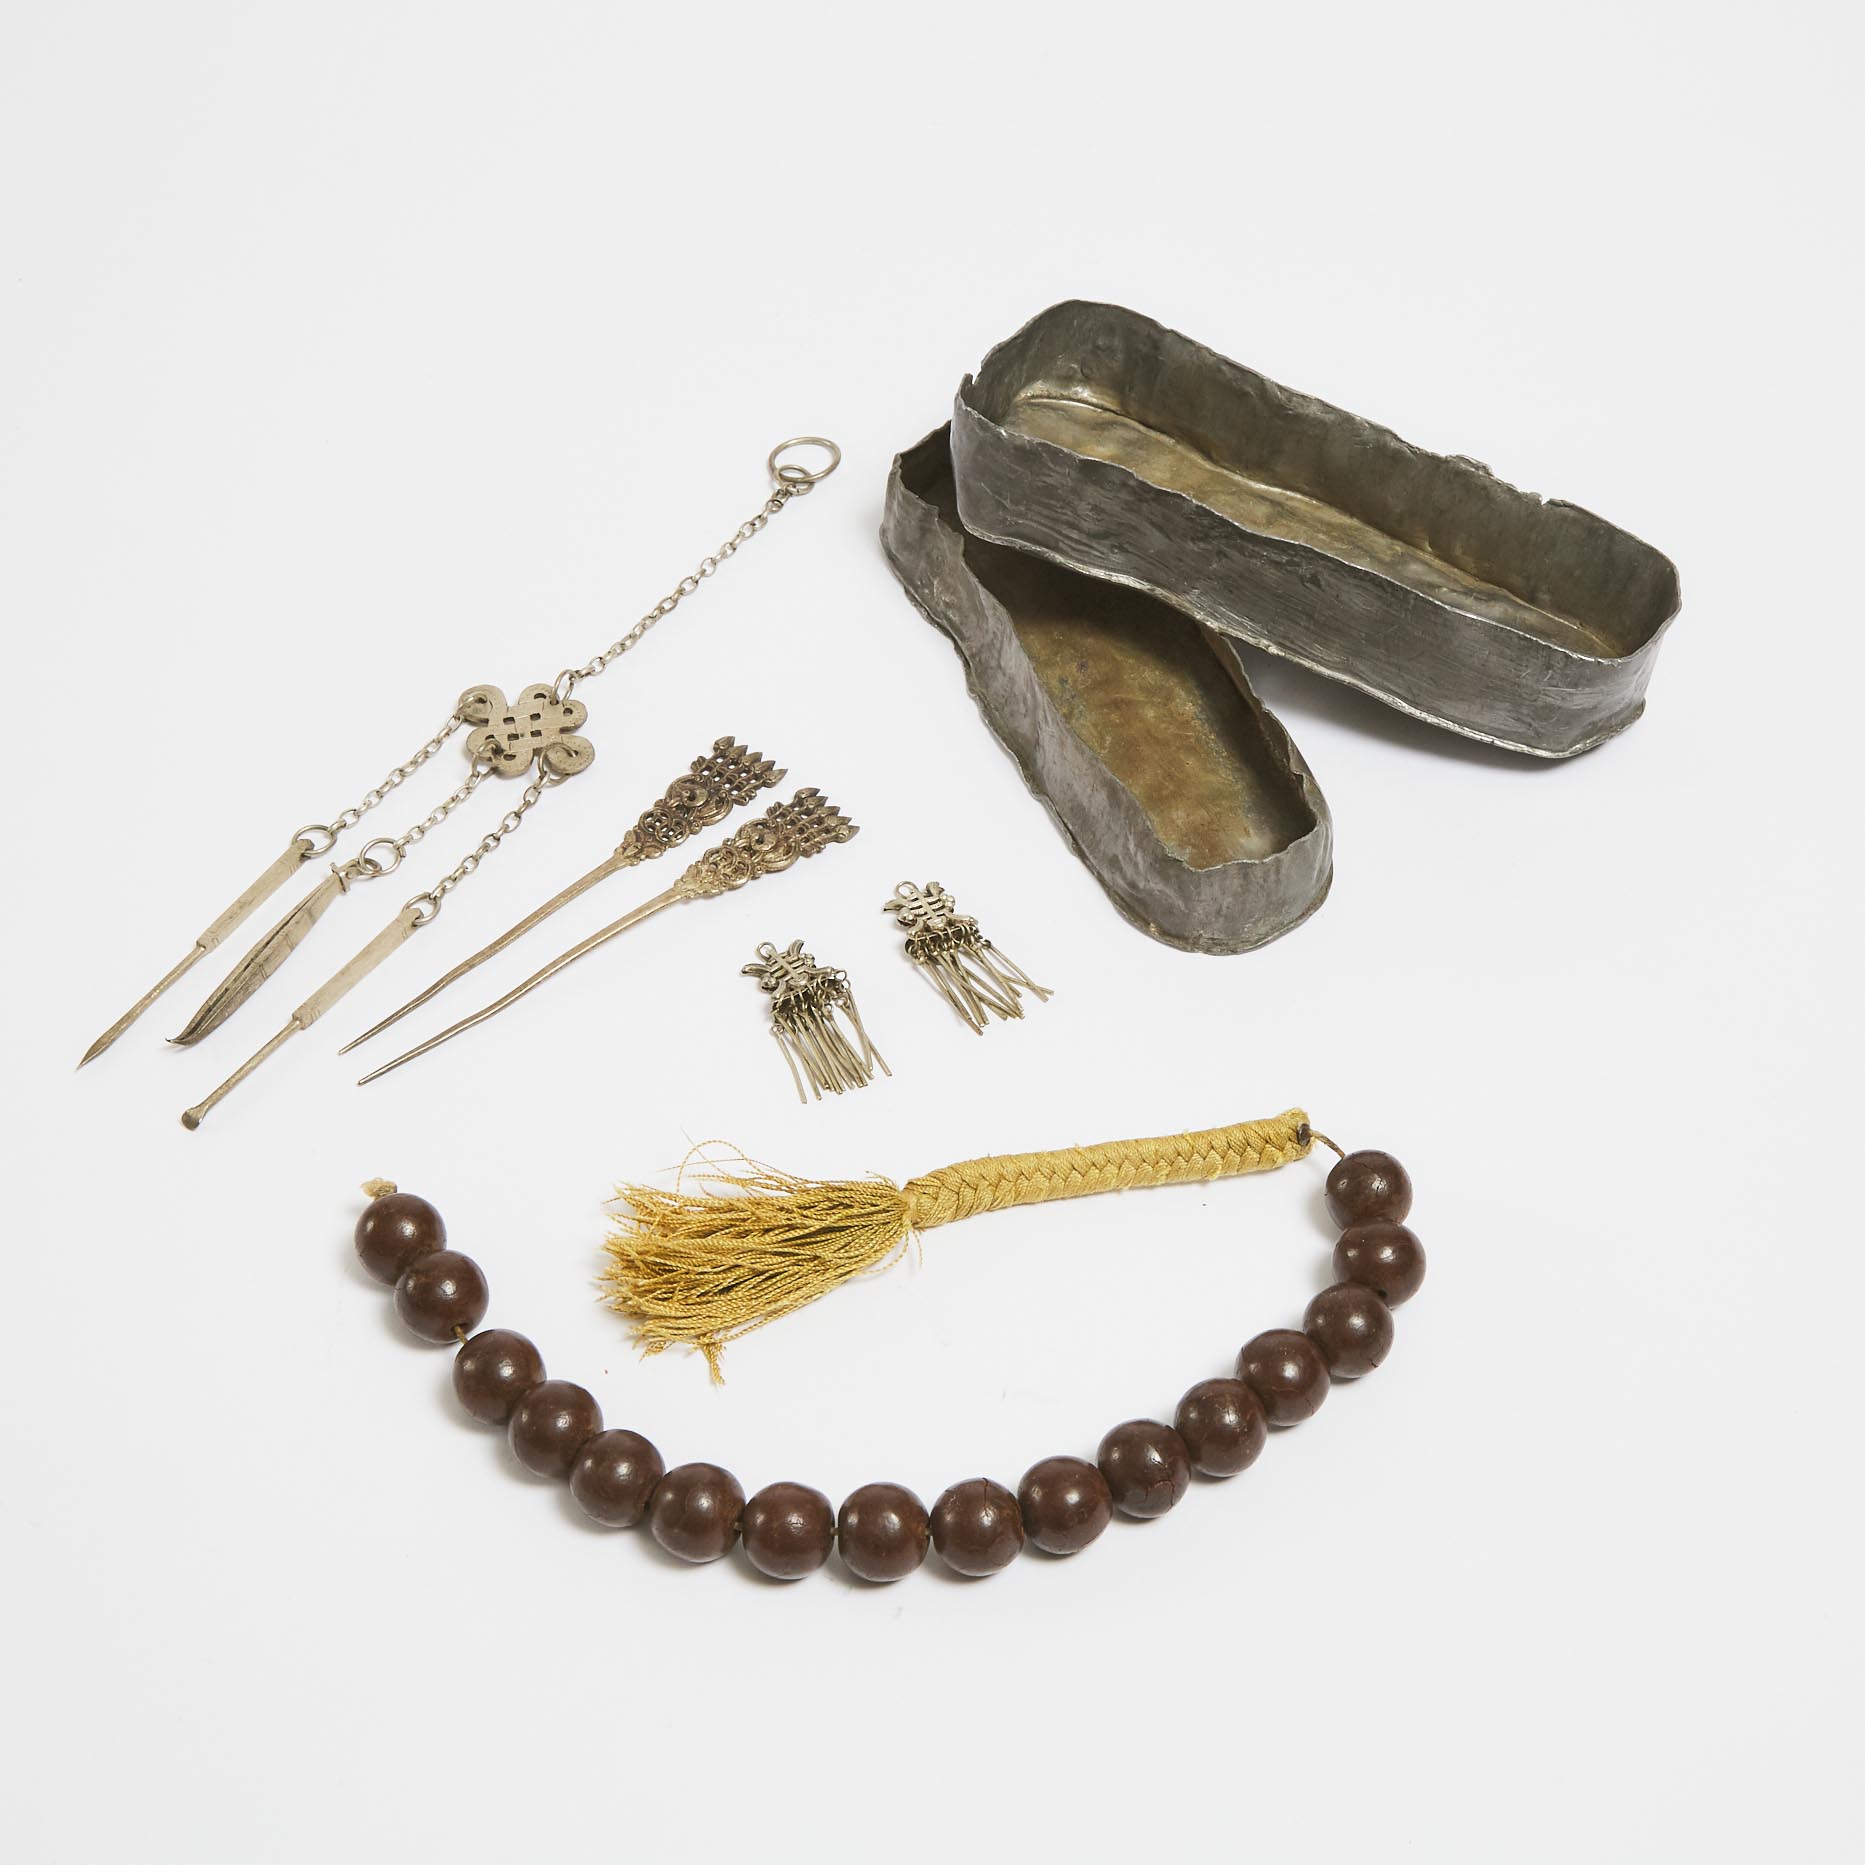 A Group of Six Chinese Pewter Items, Together With a String of Composite Beads, Late Qing Dynasty, 19th Century